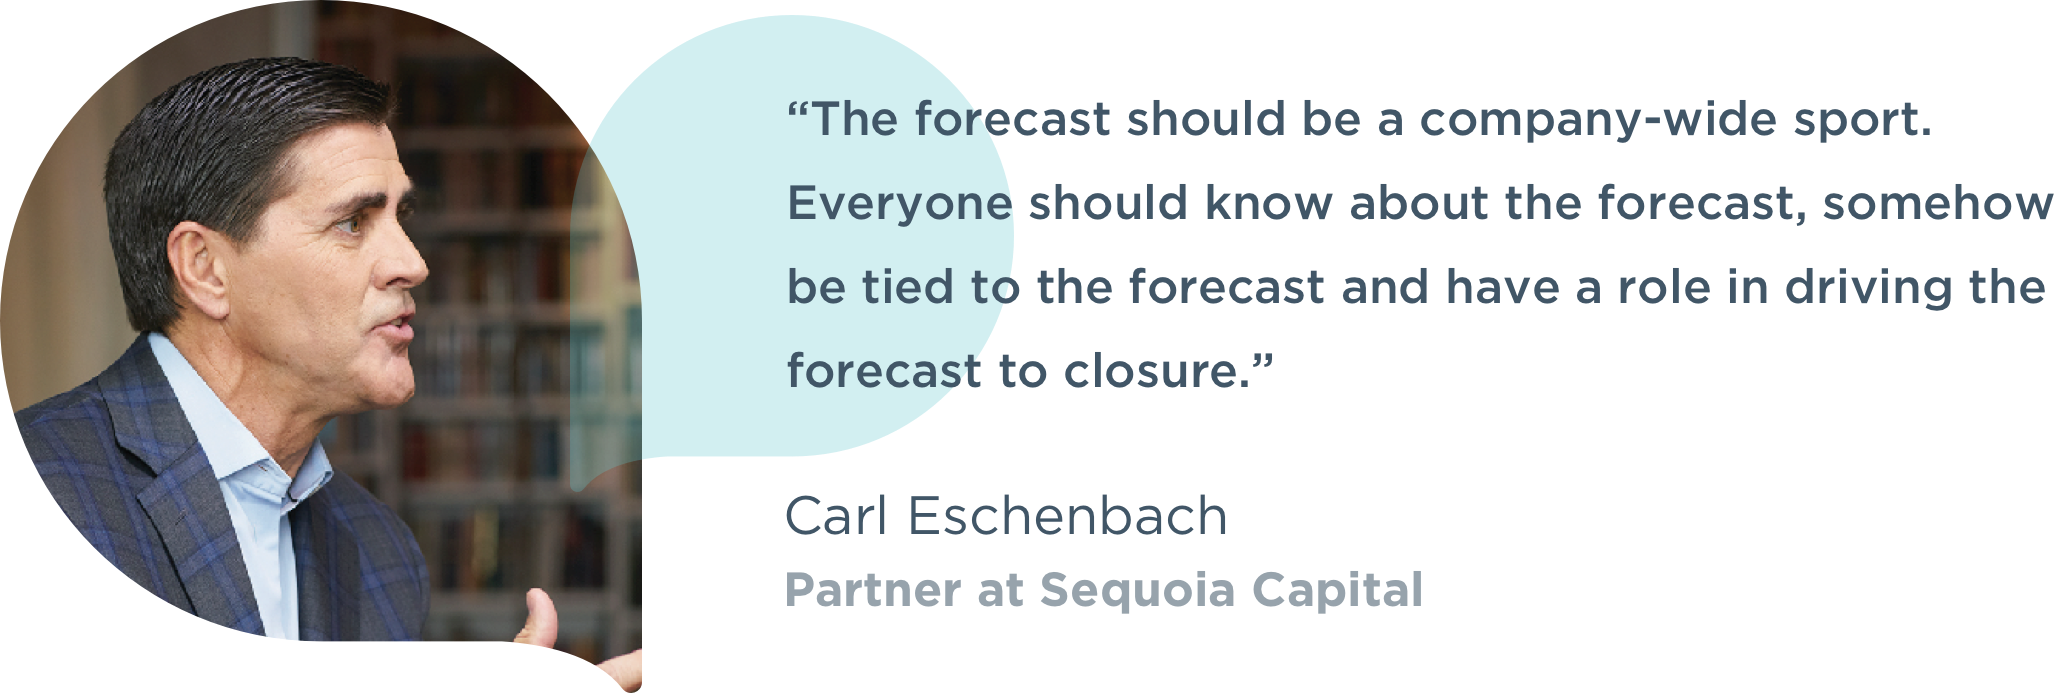 Carl Eschenbach, Partner at Sequoia Capital, headshot and quotation about sales forecasting